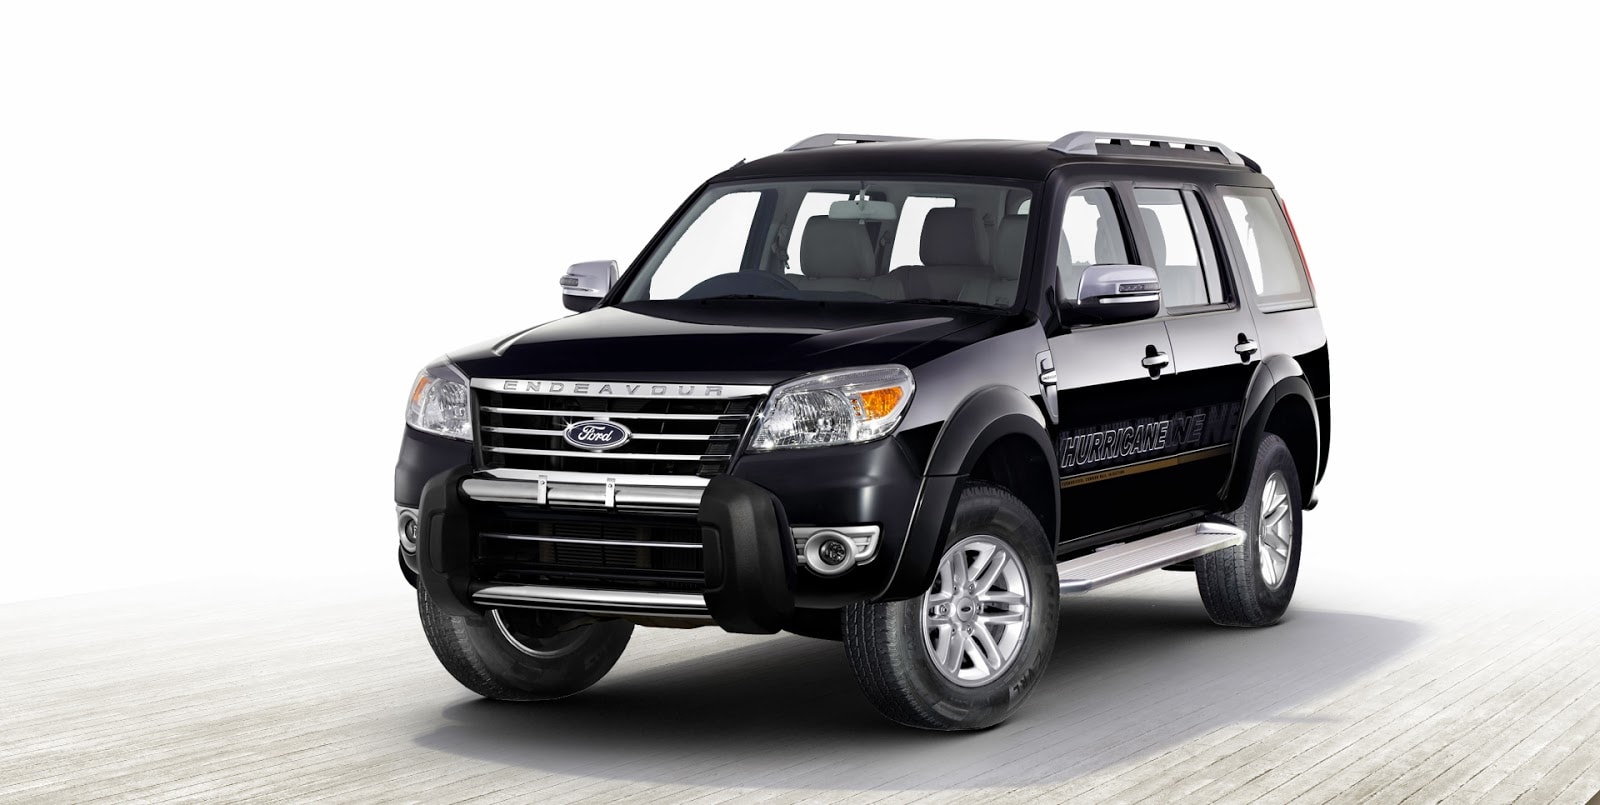 Ford Endeavour India, Price, Review, Images - Ford Cars
